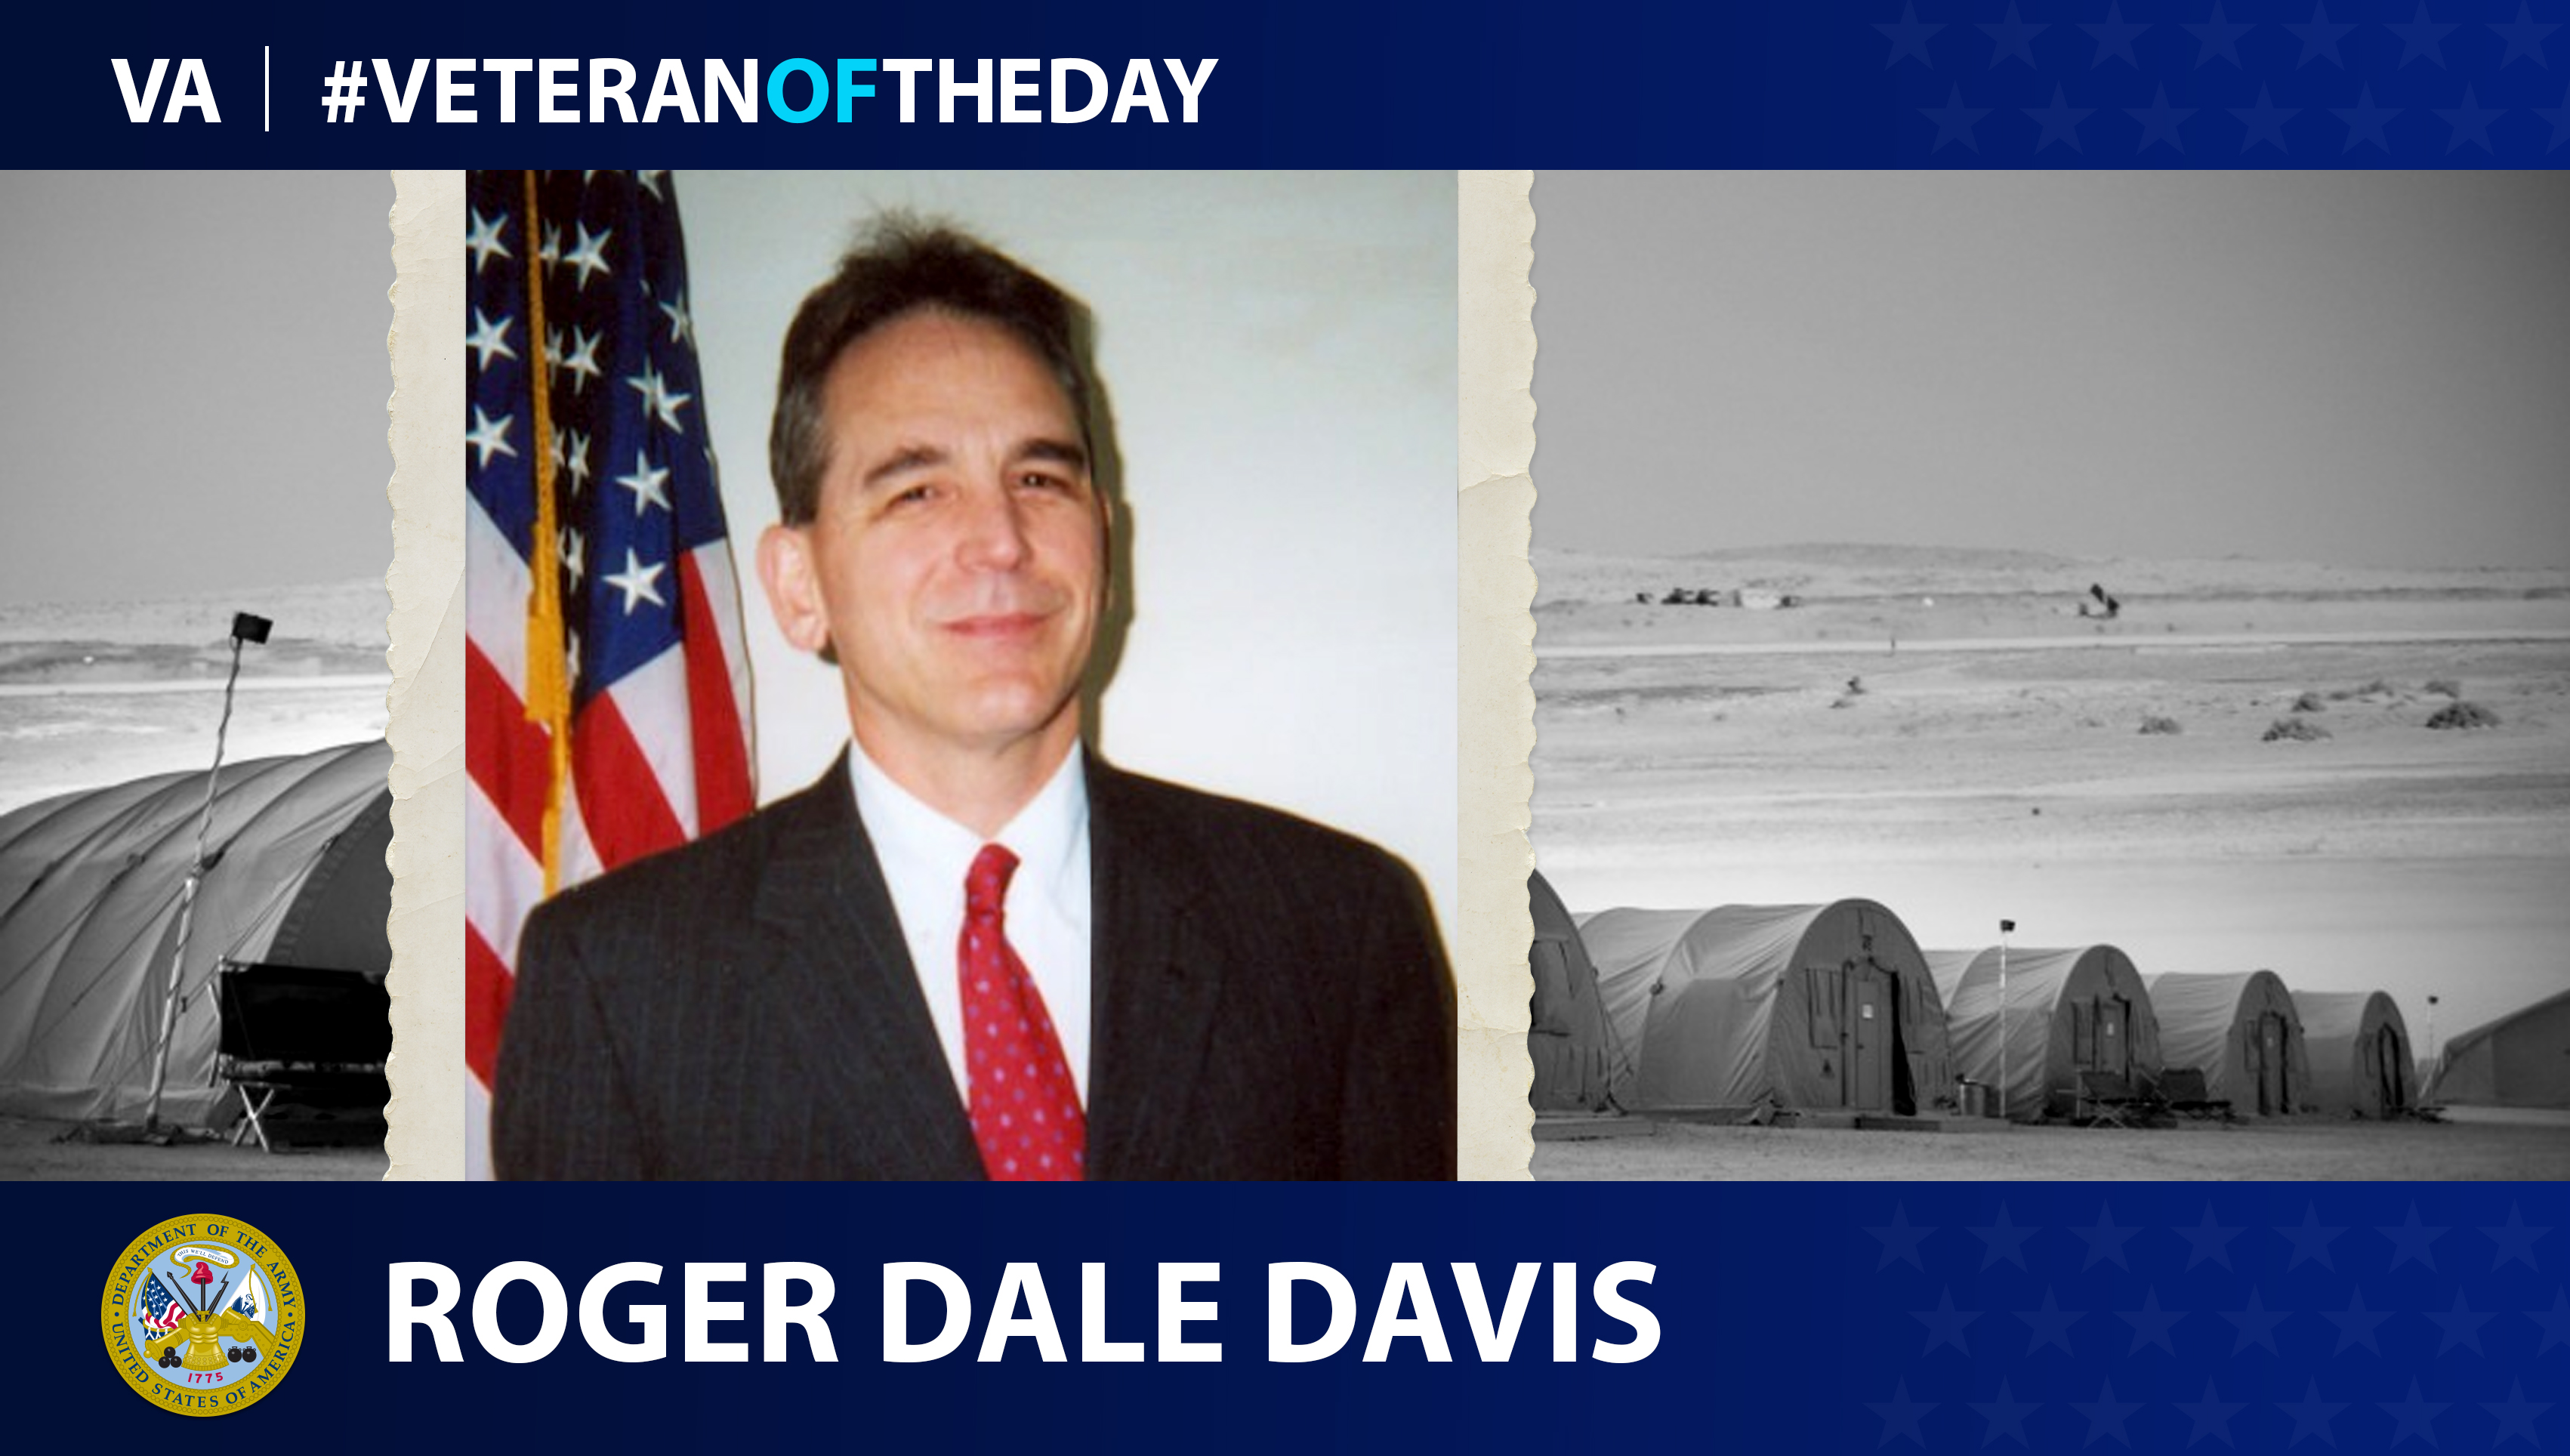 Army Veteran Roger Dale Davis is today's Veteran of the Day.